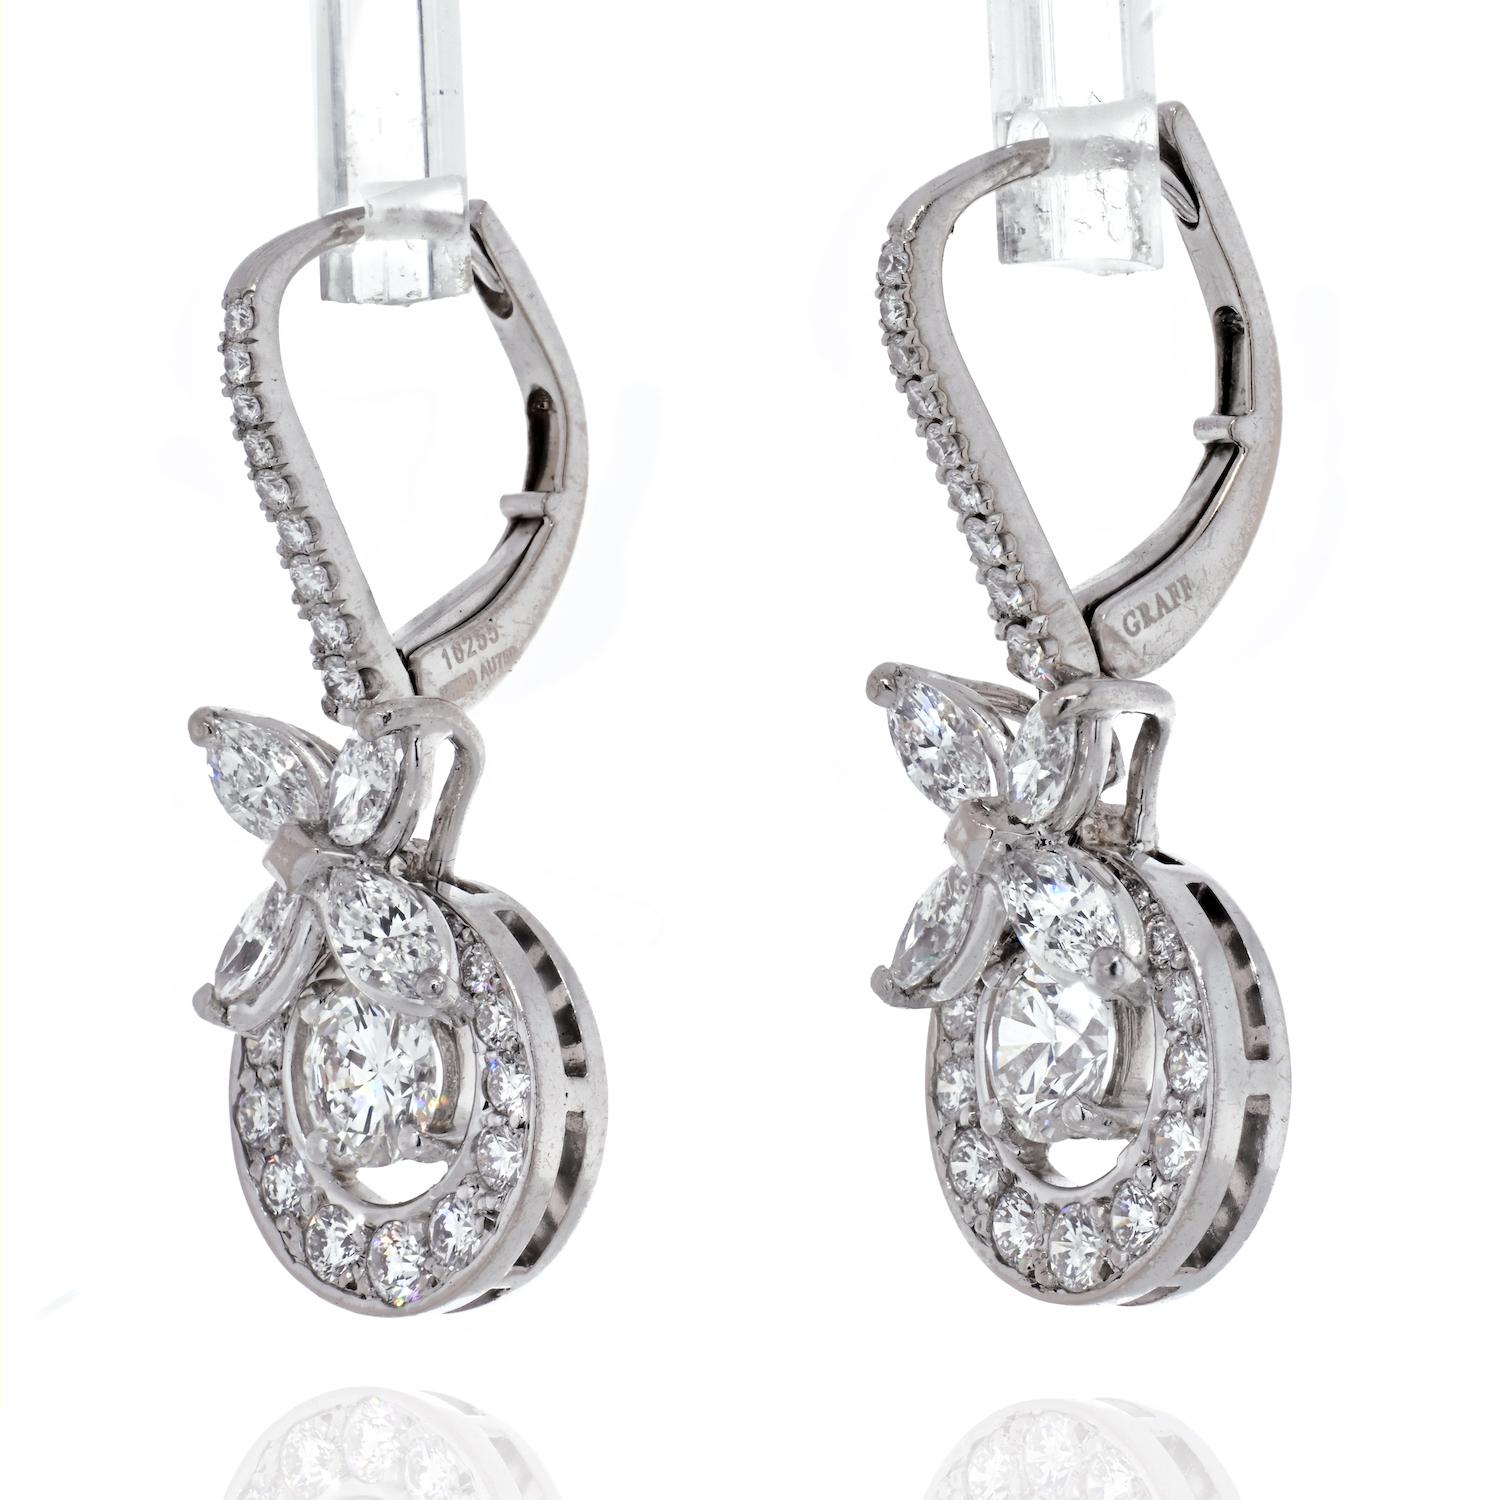 In these 18K white gold drop butterfly earrings, diamonds are impeccably matched by Graff's master craftsmen. Designed to catch the light with the wearer's every gesture, elegant marquise shape diamonds are suspended beneath the delicate diamond